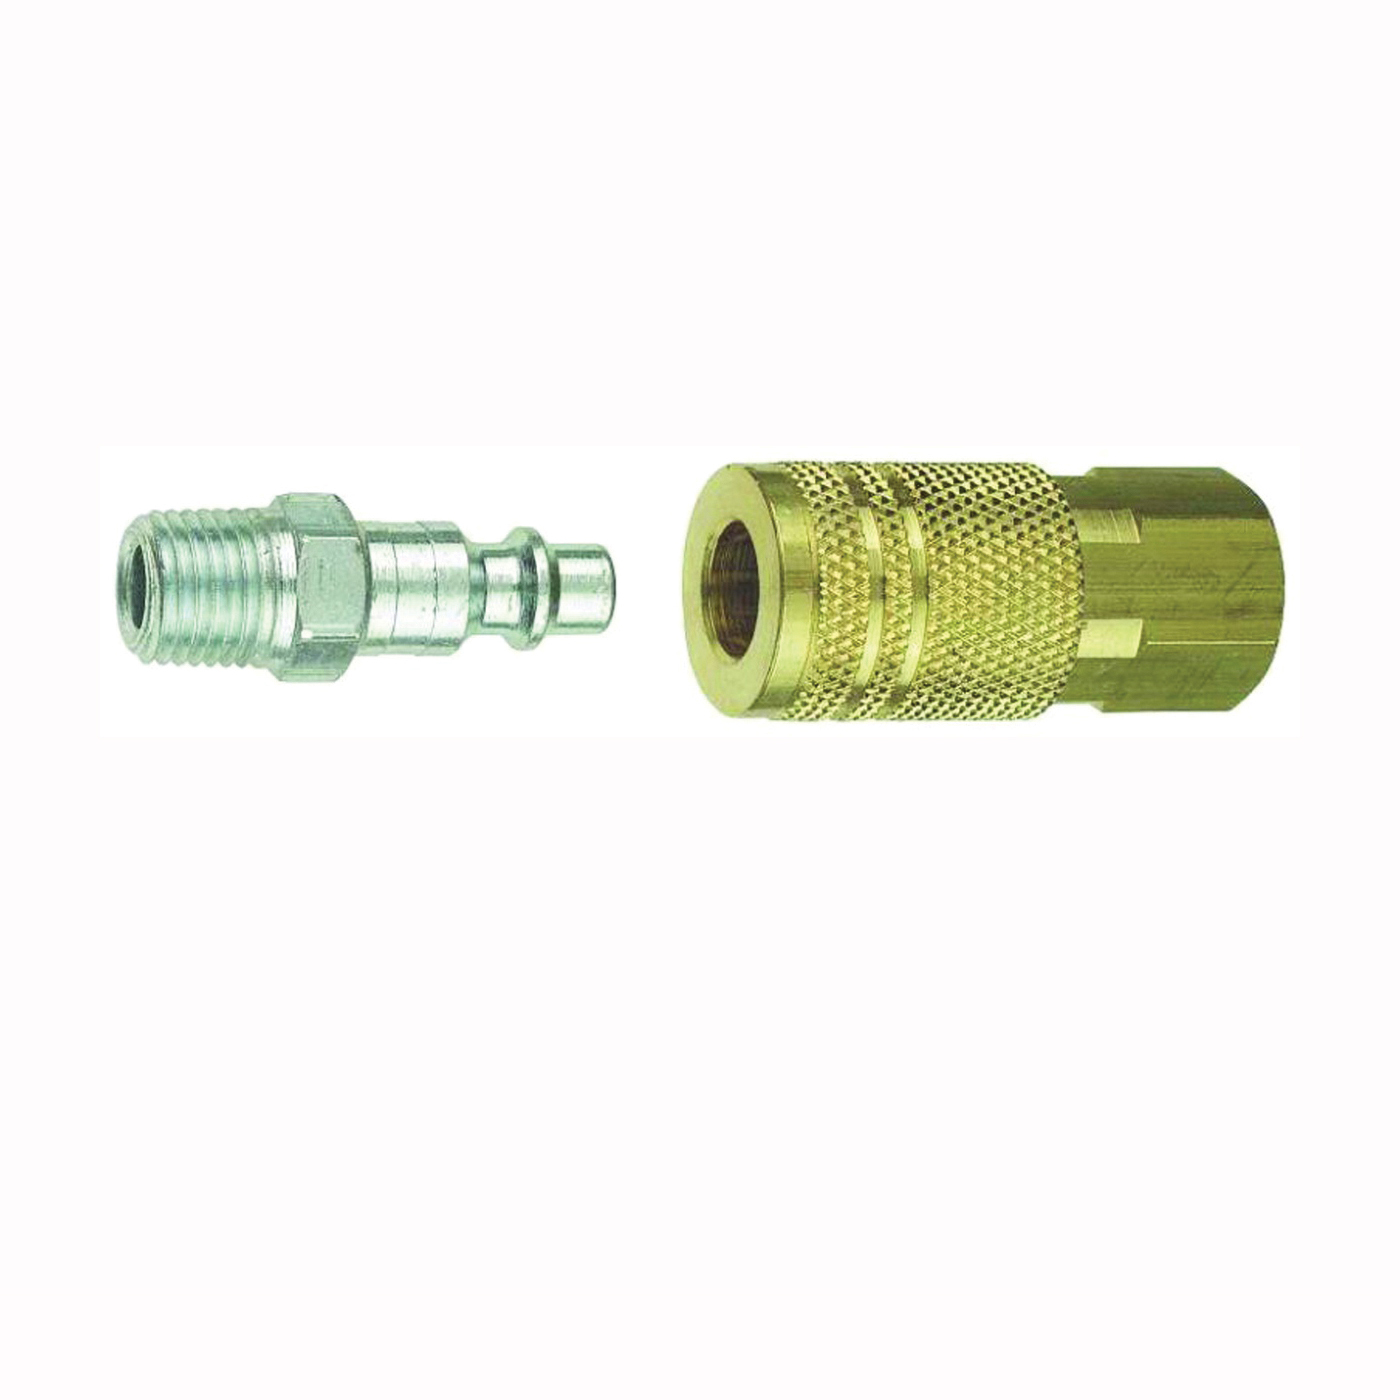 13-401 Coupler and Plug Set, 1/4 in